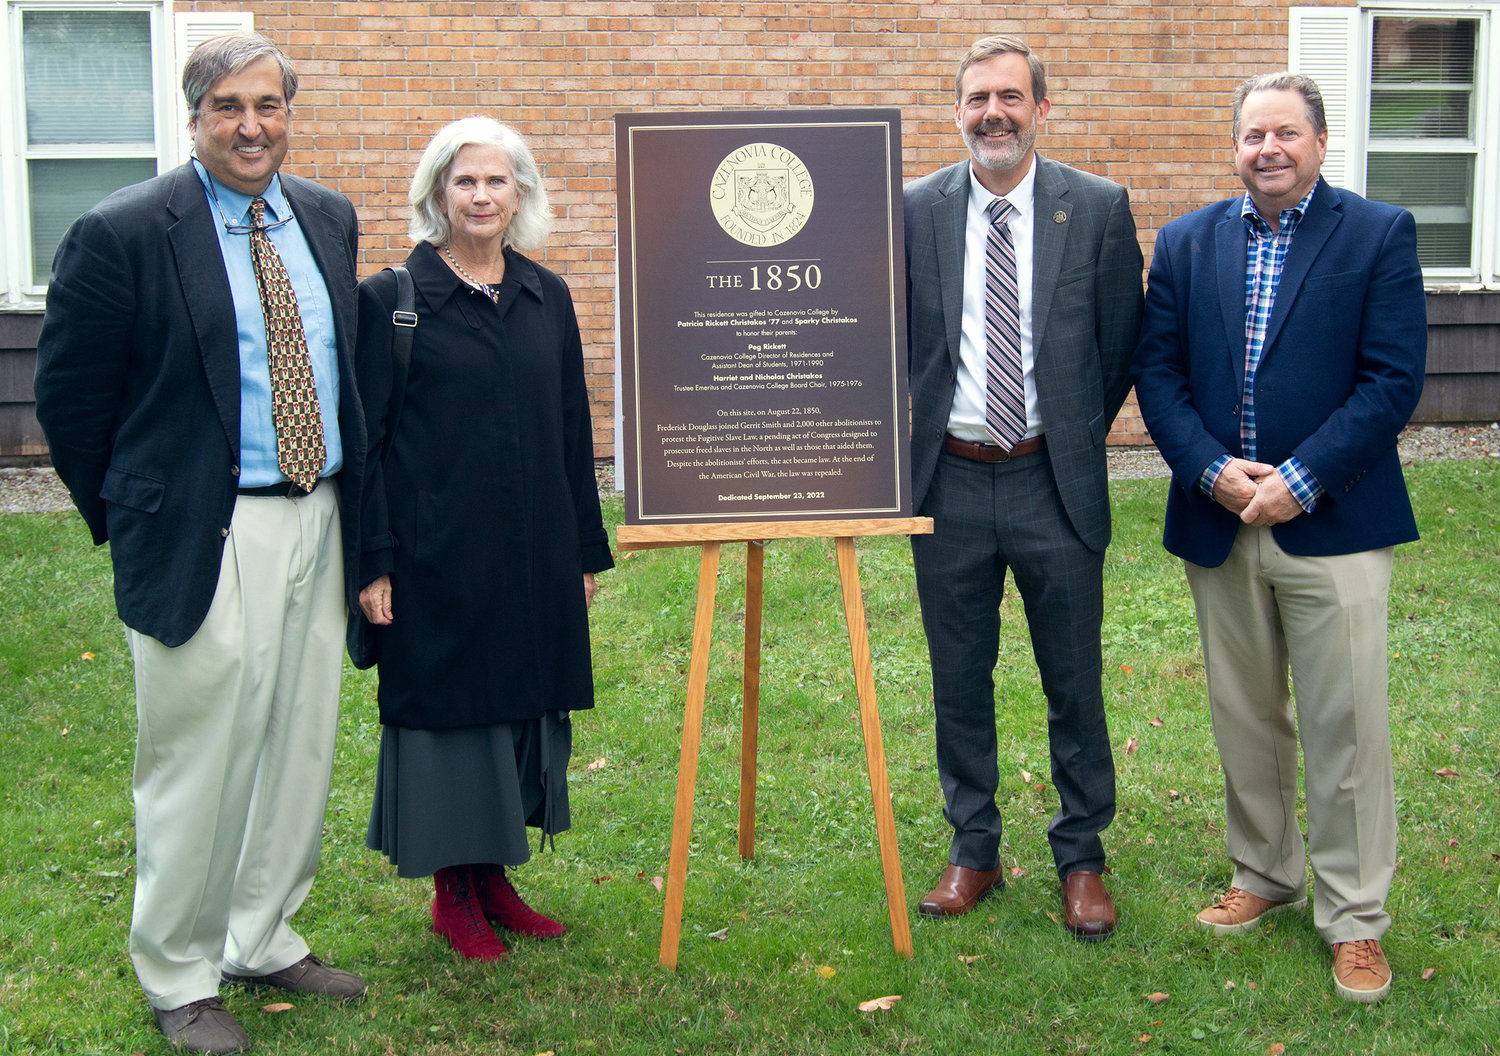 Cazenovia College dedicated the property at 9 Sullivan St. which was recently donated to the college by the Christakos Family, with a formal ceremony on Friday, Sept. 23. From left: Sparky and Patricia Ricket Christakos, donors of the property; David Bergh, Cazenovia College president; and Kenneth C. Gardiner,  chairman of the college’s board of trustees.